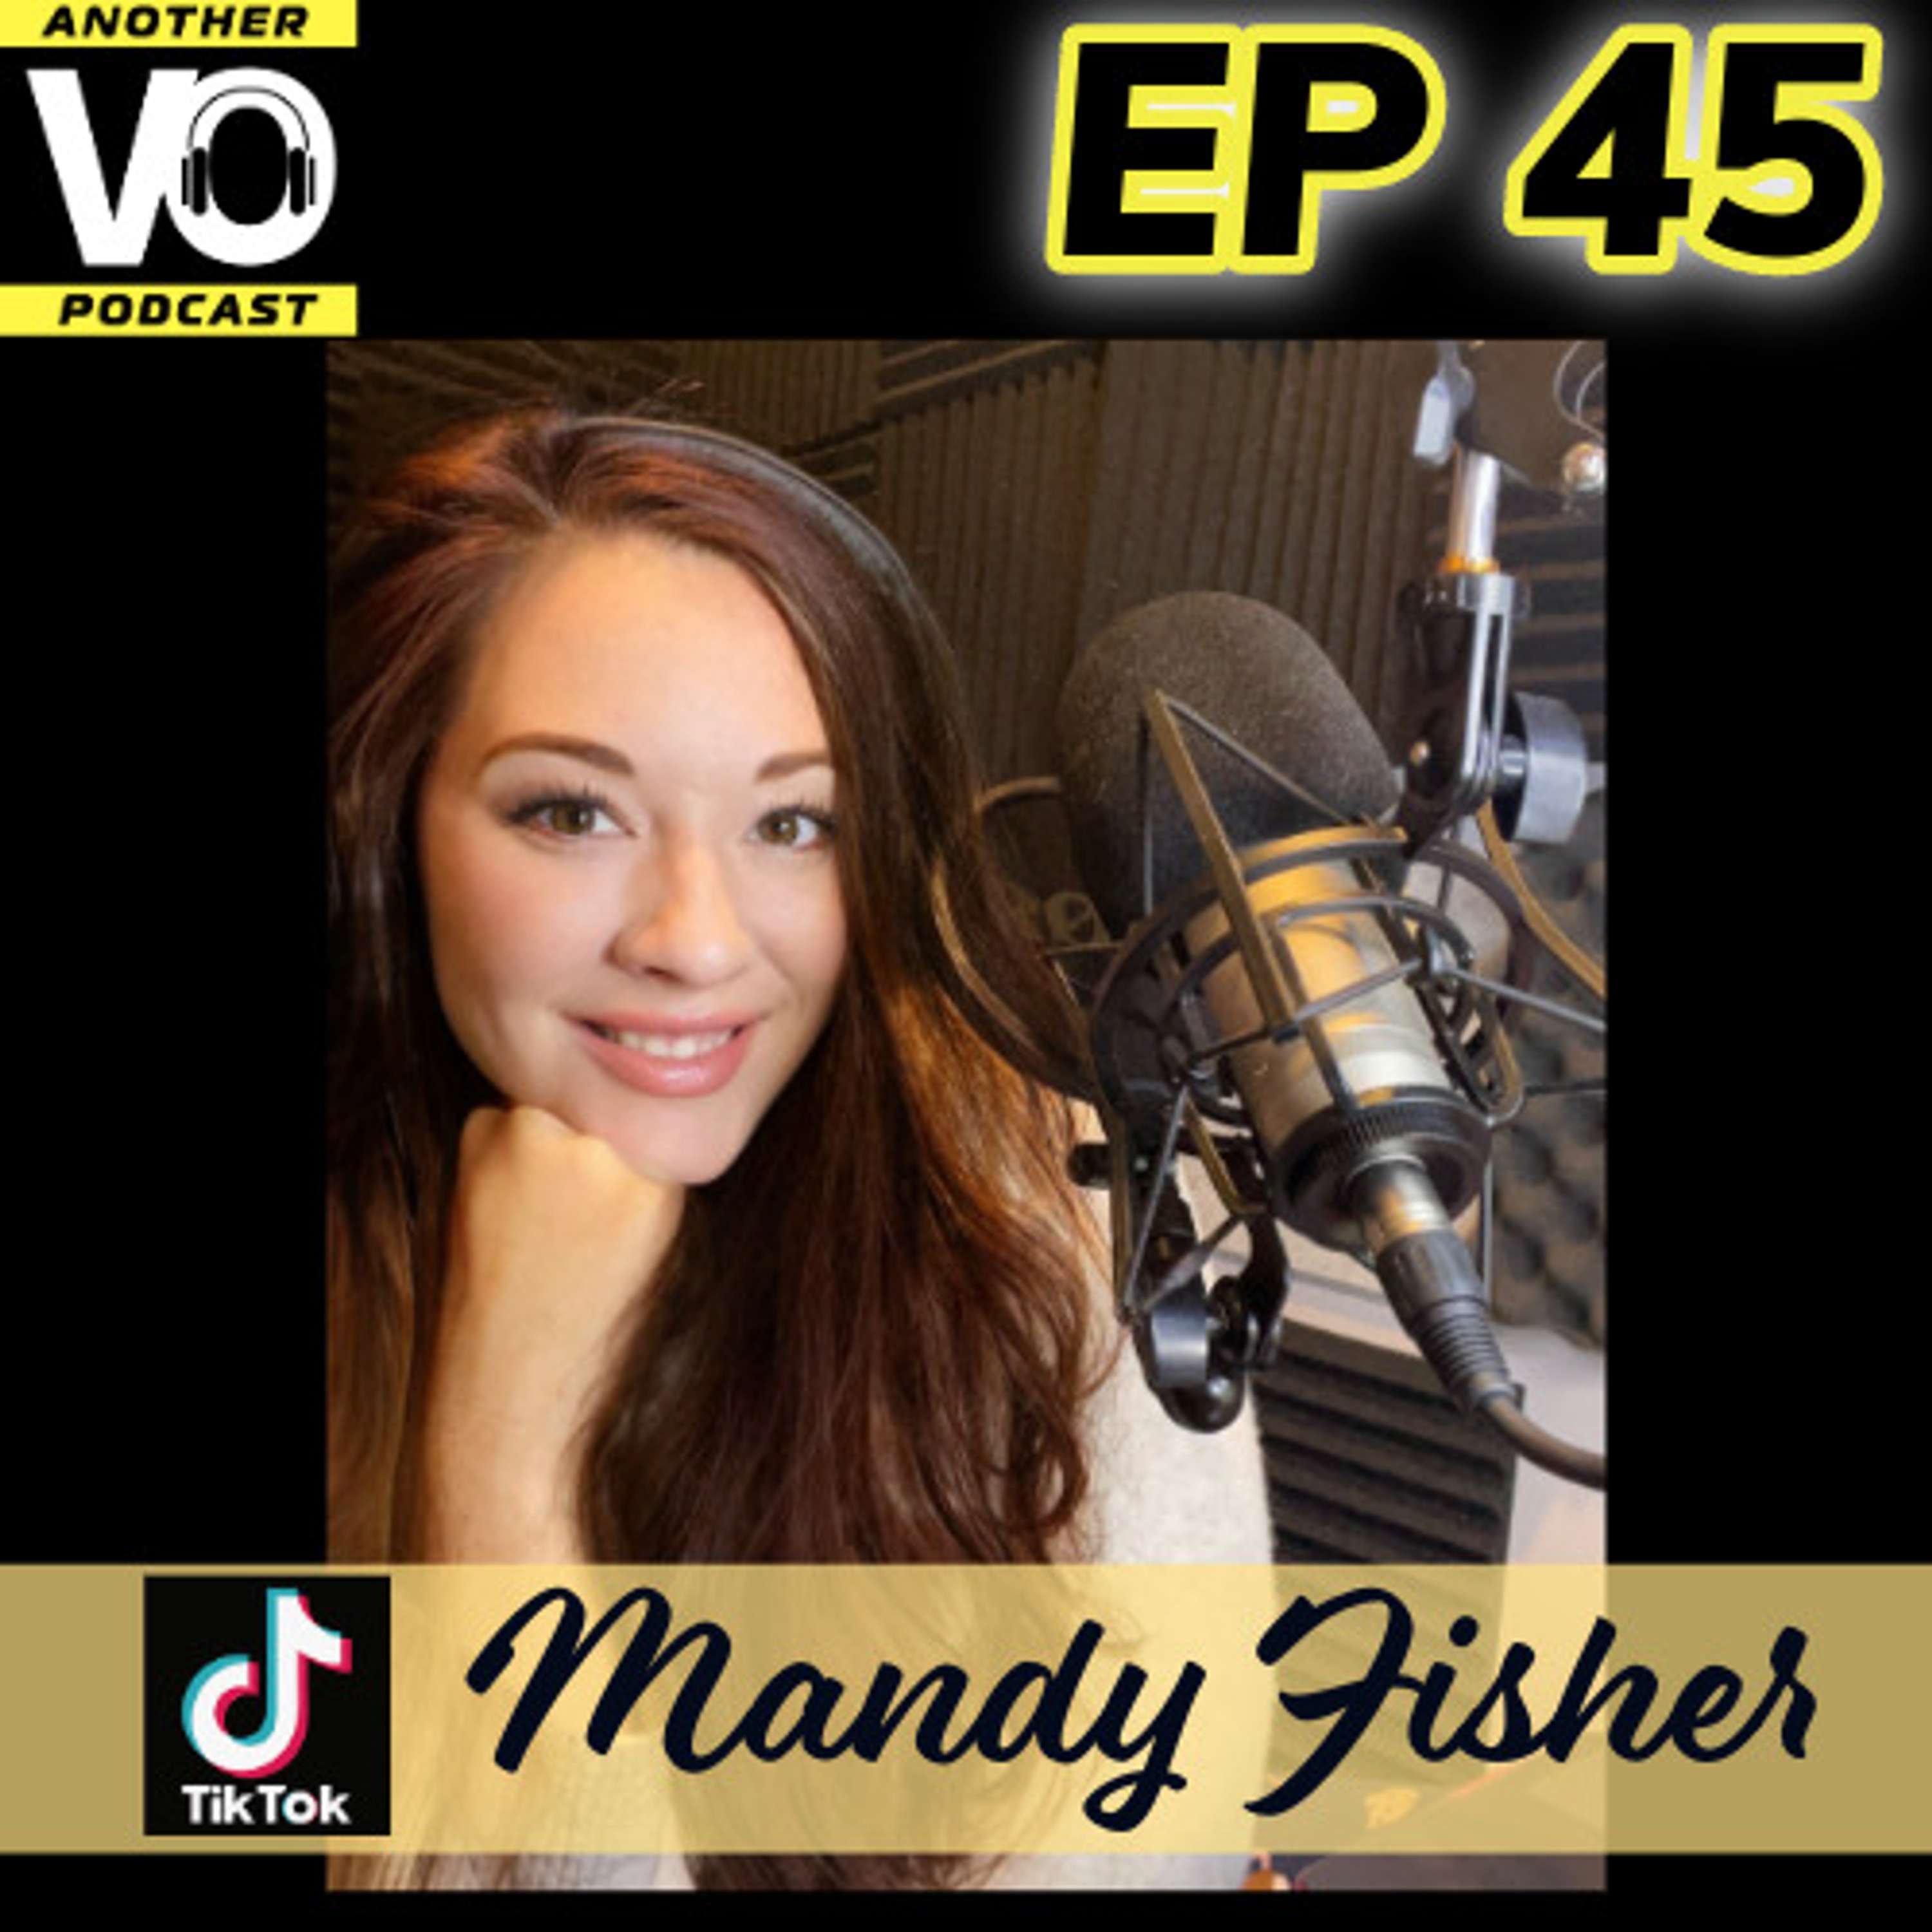 EP 45 - MANDY FISHER- Astoria Red